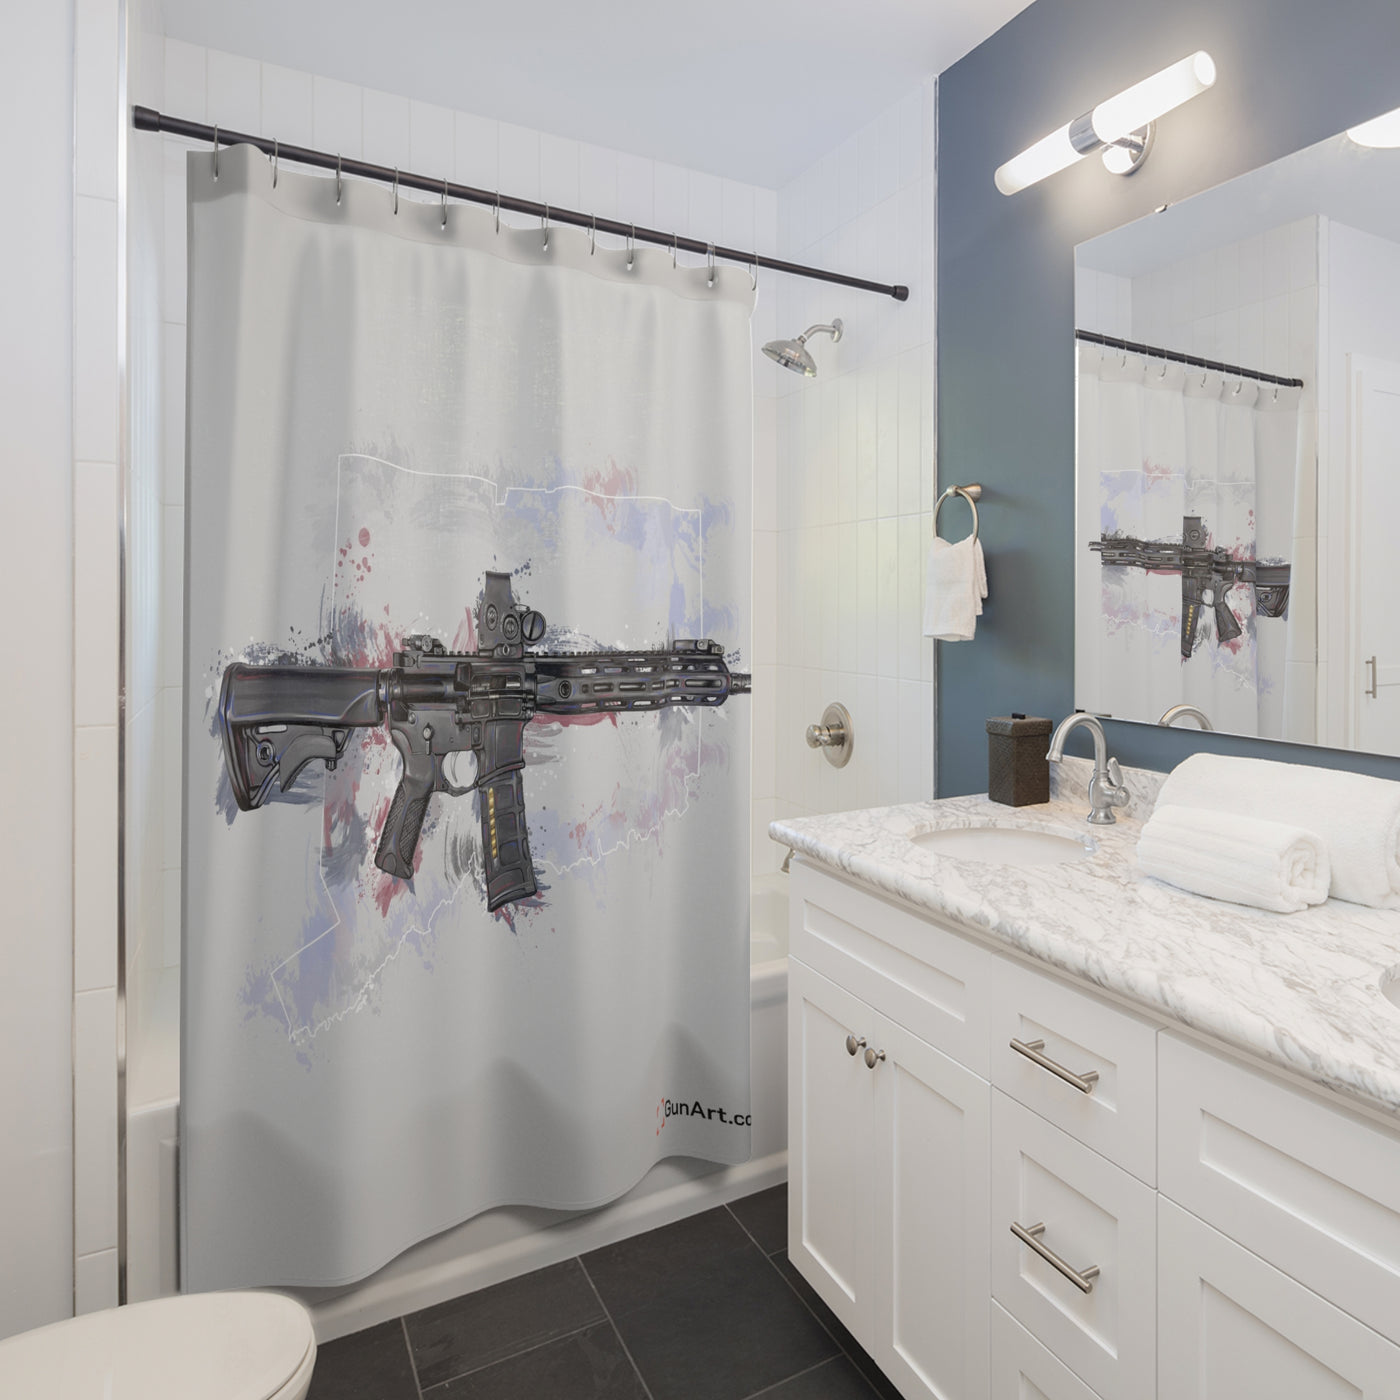 Defending Freedom - Connecticut - AR-15 State Shower Curtains - White State